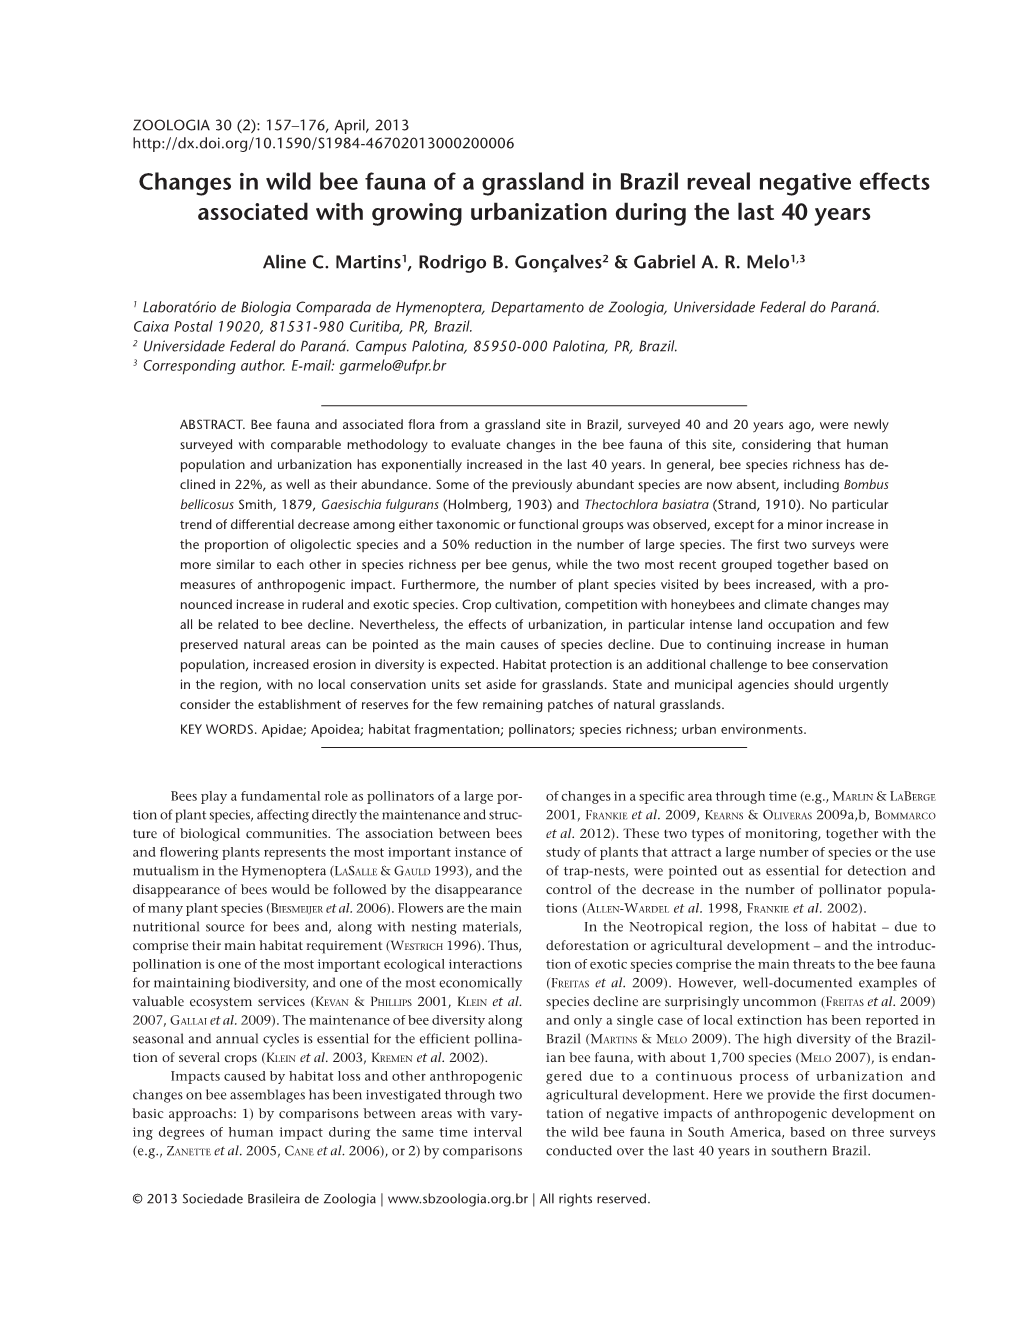 Changes in Wild Bee Fauna of a Grassland in Brazil Reveal Negative Effects Associated with Growing Urbanization During the Last 40 Years